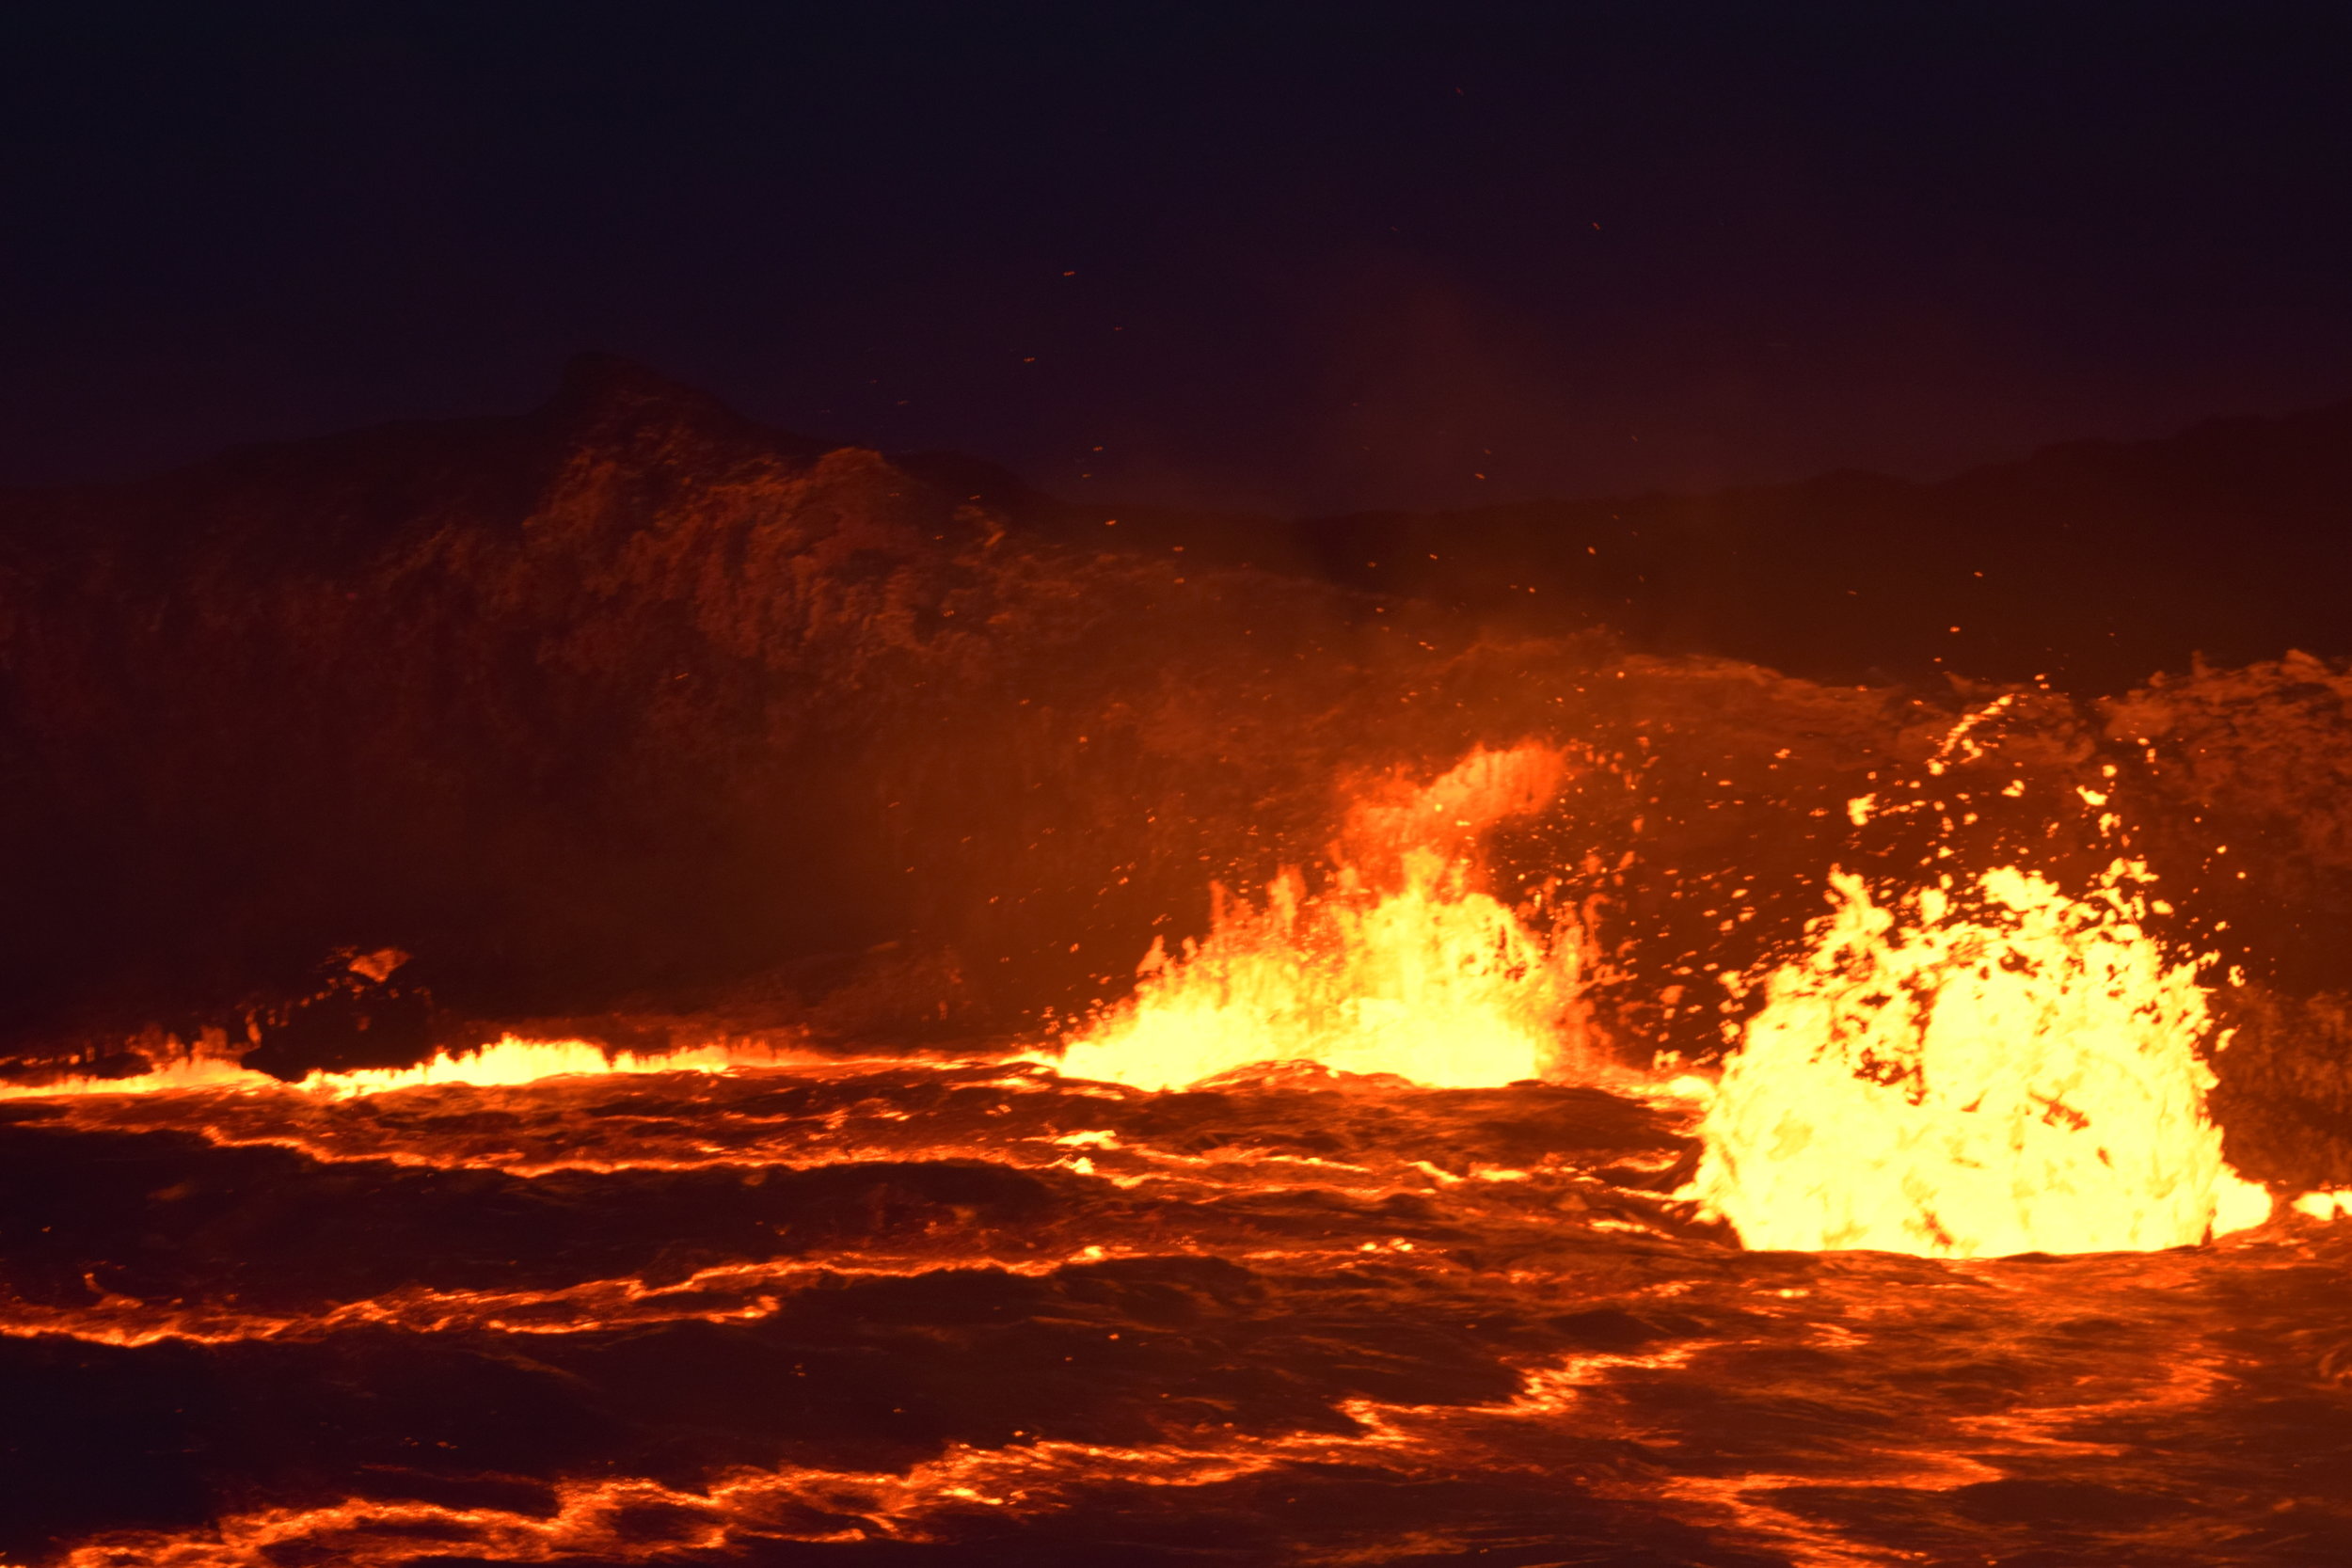 Magma explodes upwards as a side of the crater caved in